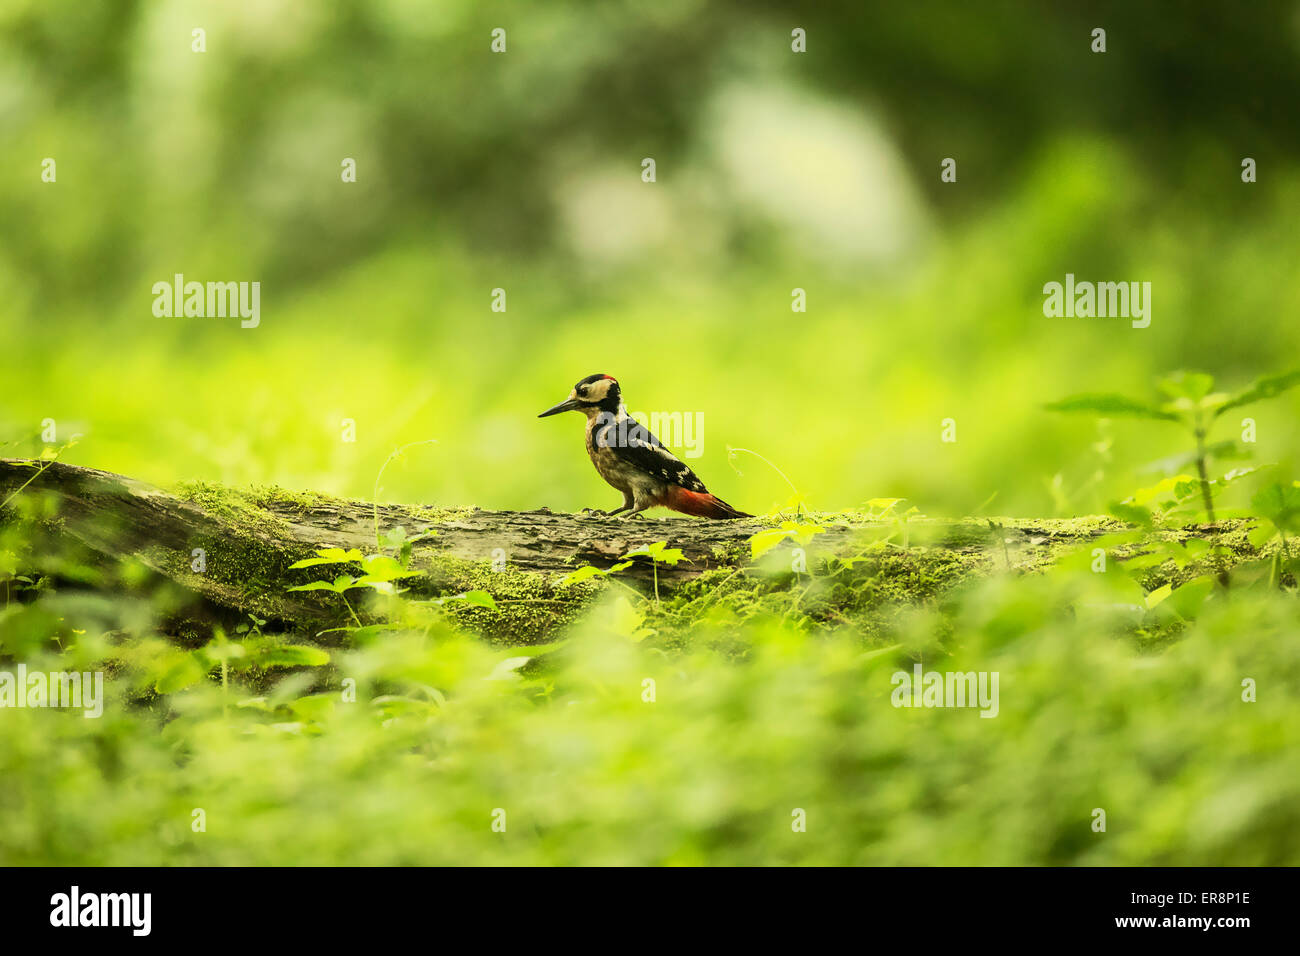 A Great spotted woodpecker ( Dendrocopos major ) perchs on the branch of a tree in Wuyuan county, Jiangxi province, China on 23t Stock Photo